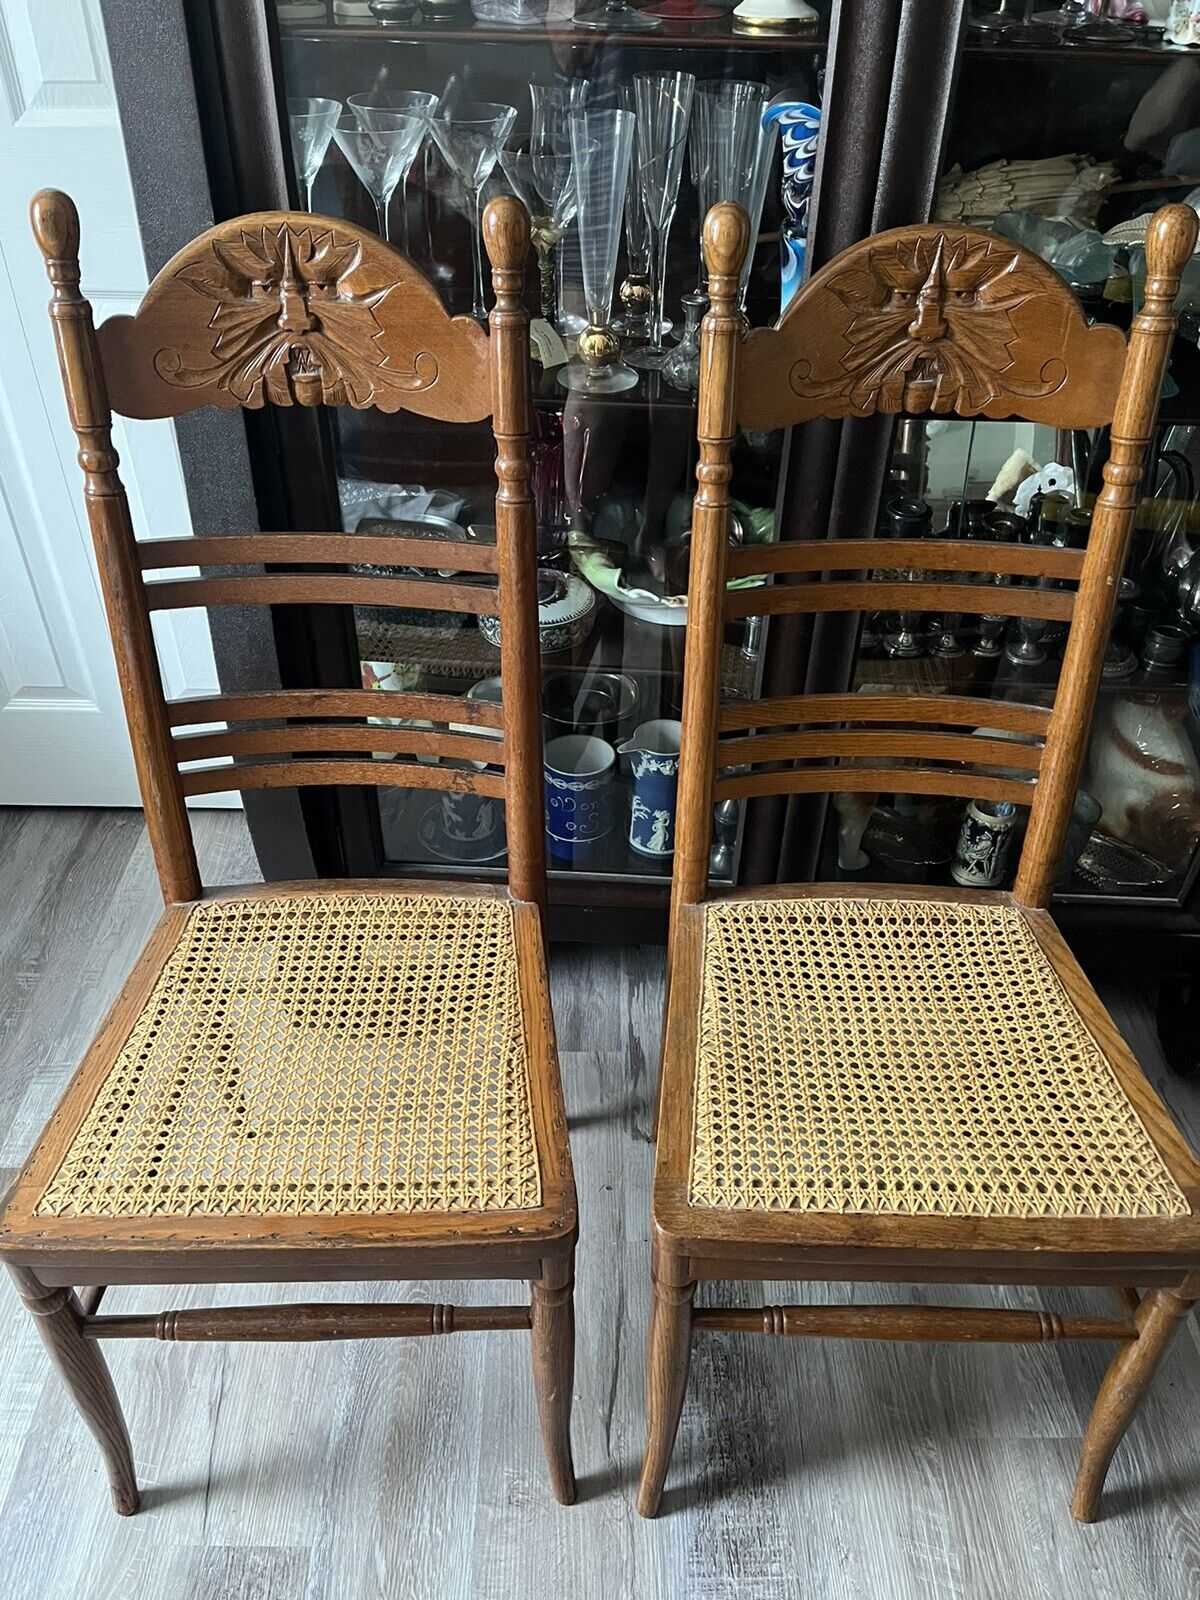 ANTIQUE 1800 SIGNED 42”PAIR CHAIRS”PAINE CO.BOSTON”ART GALLERY SCULPTURED WORK